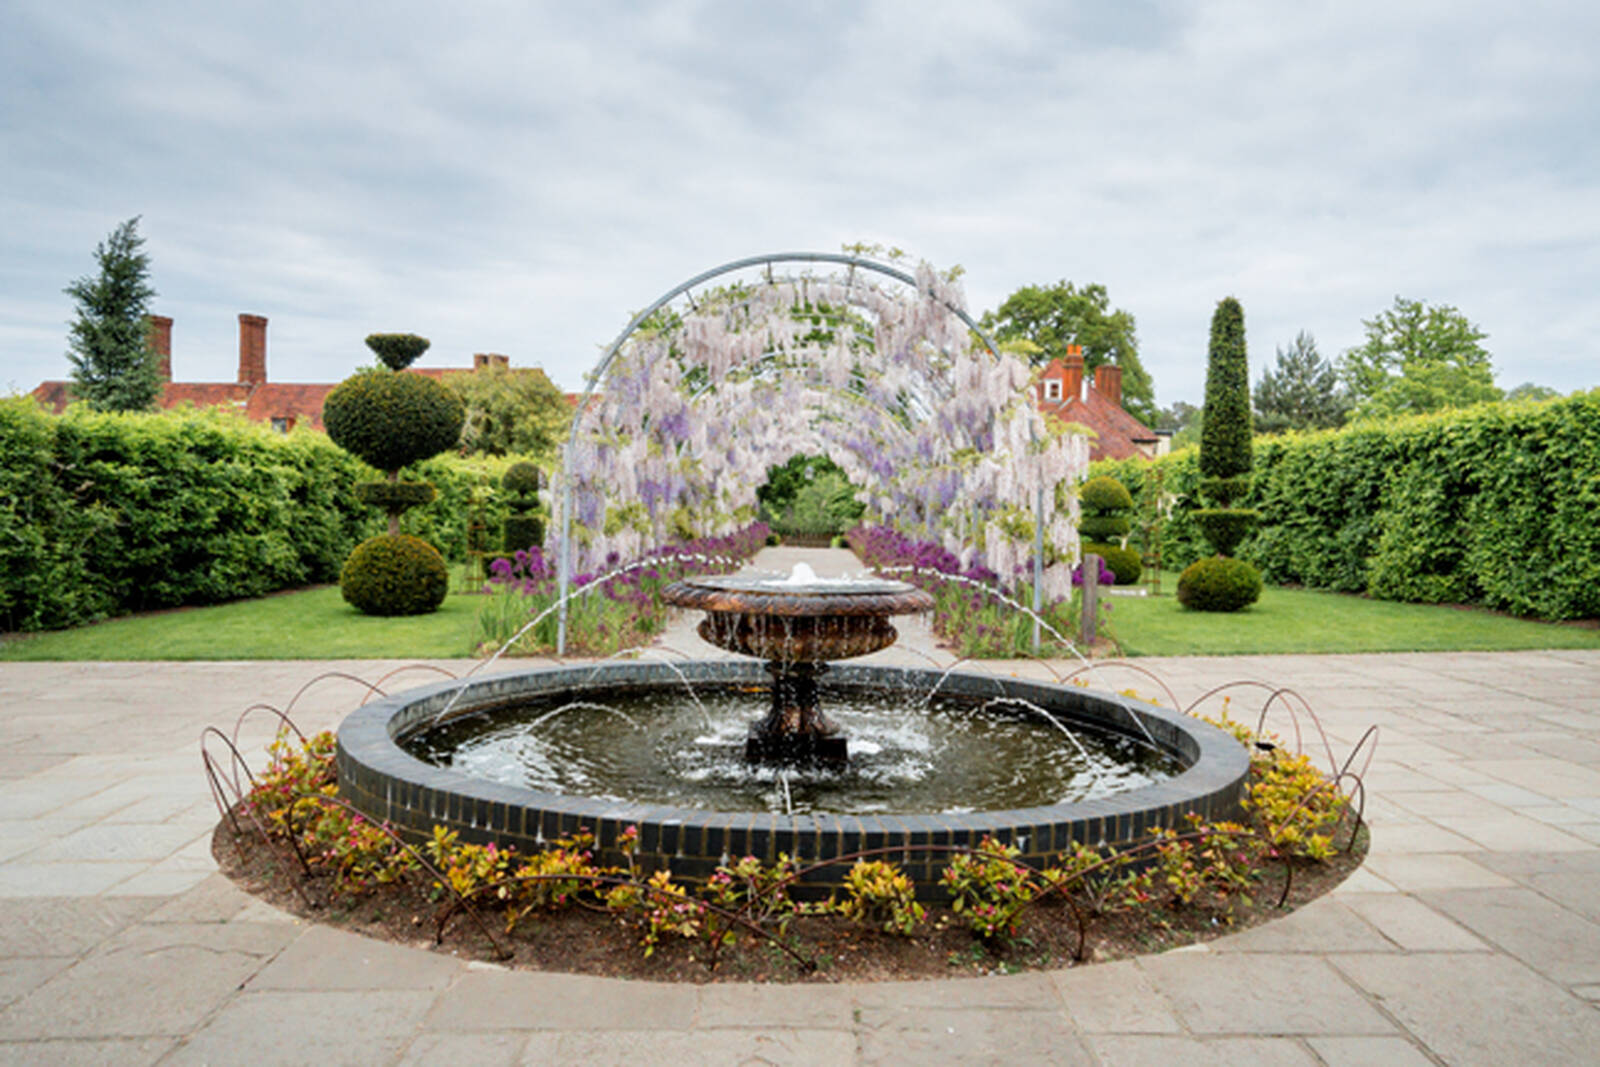 Image of RHS Garden Wisley by Rebecca Hs